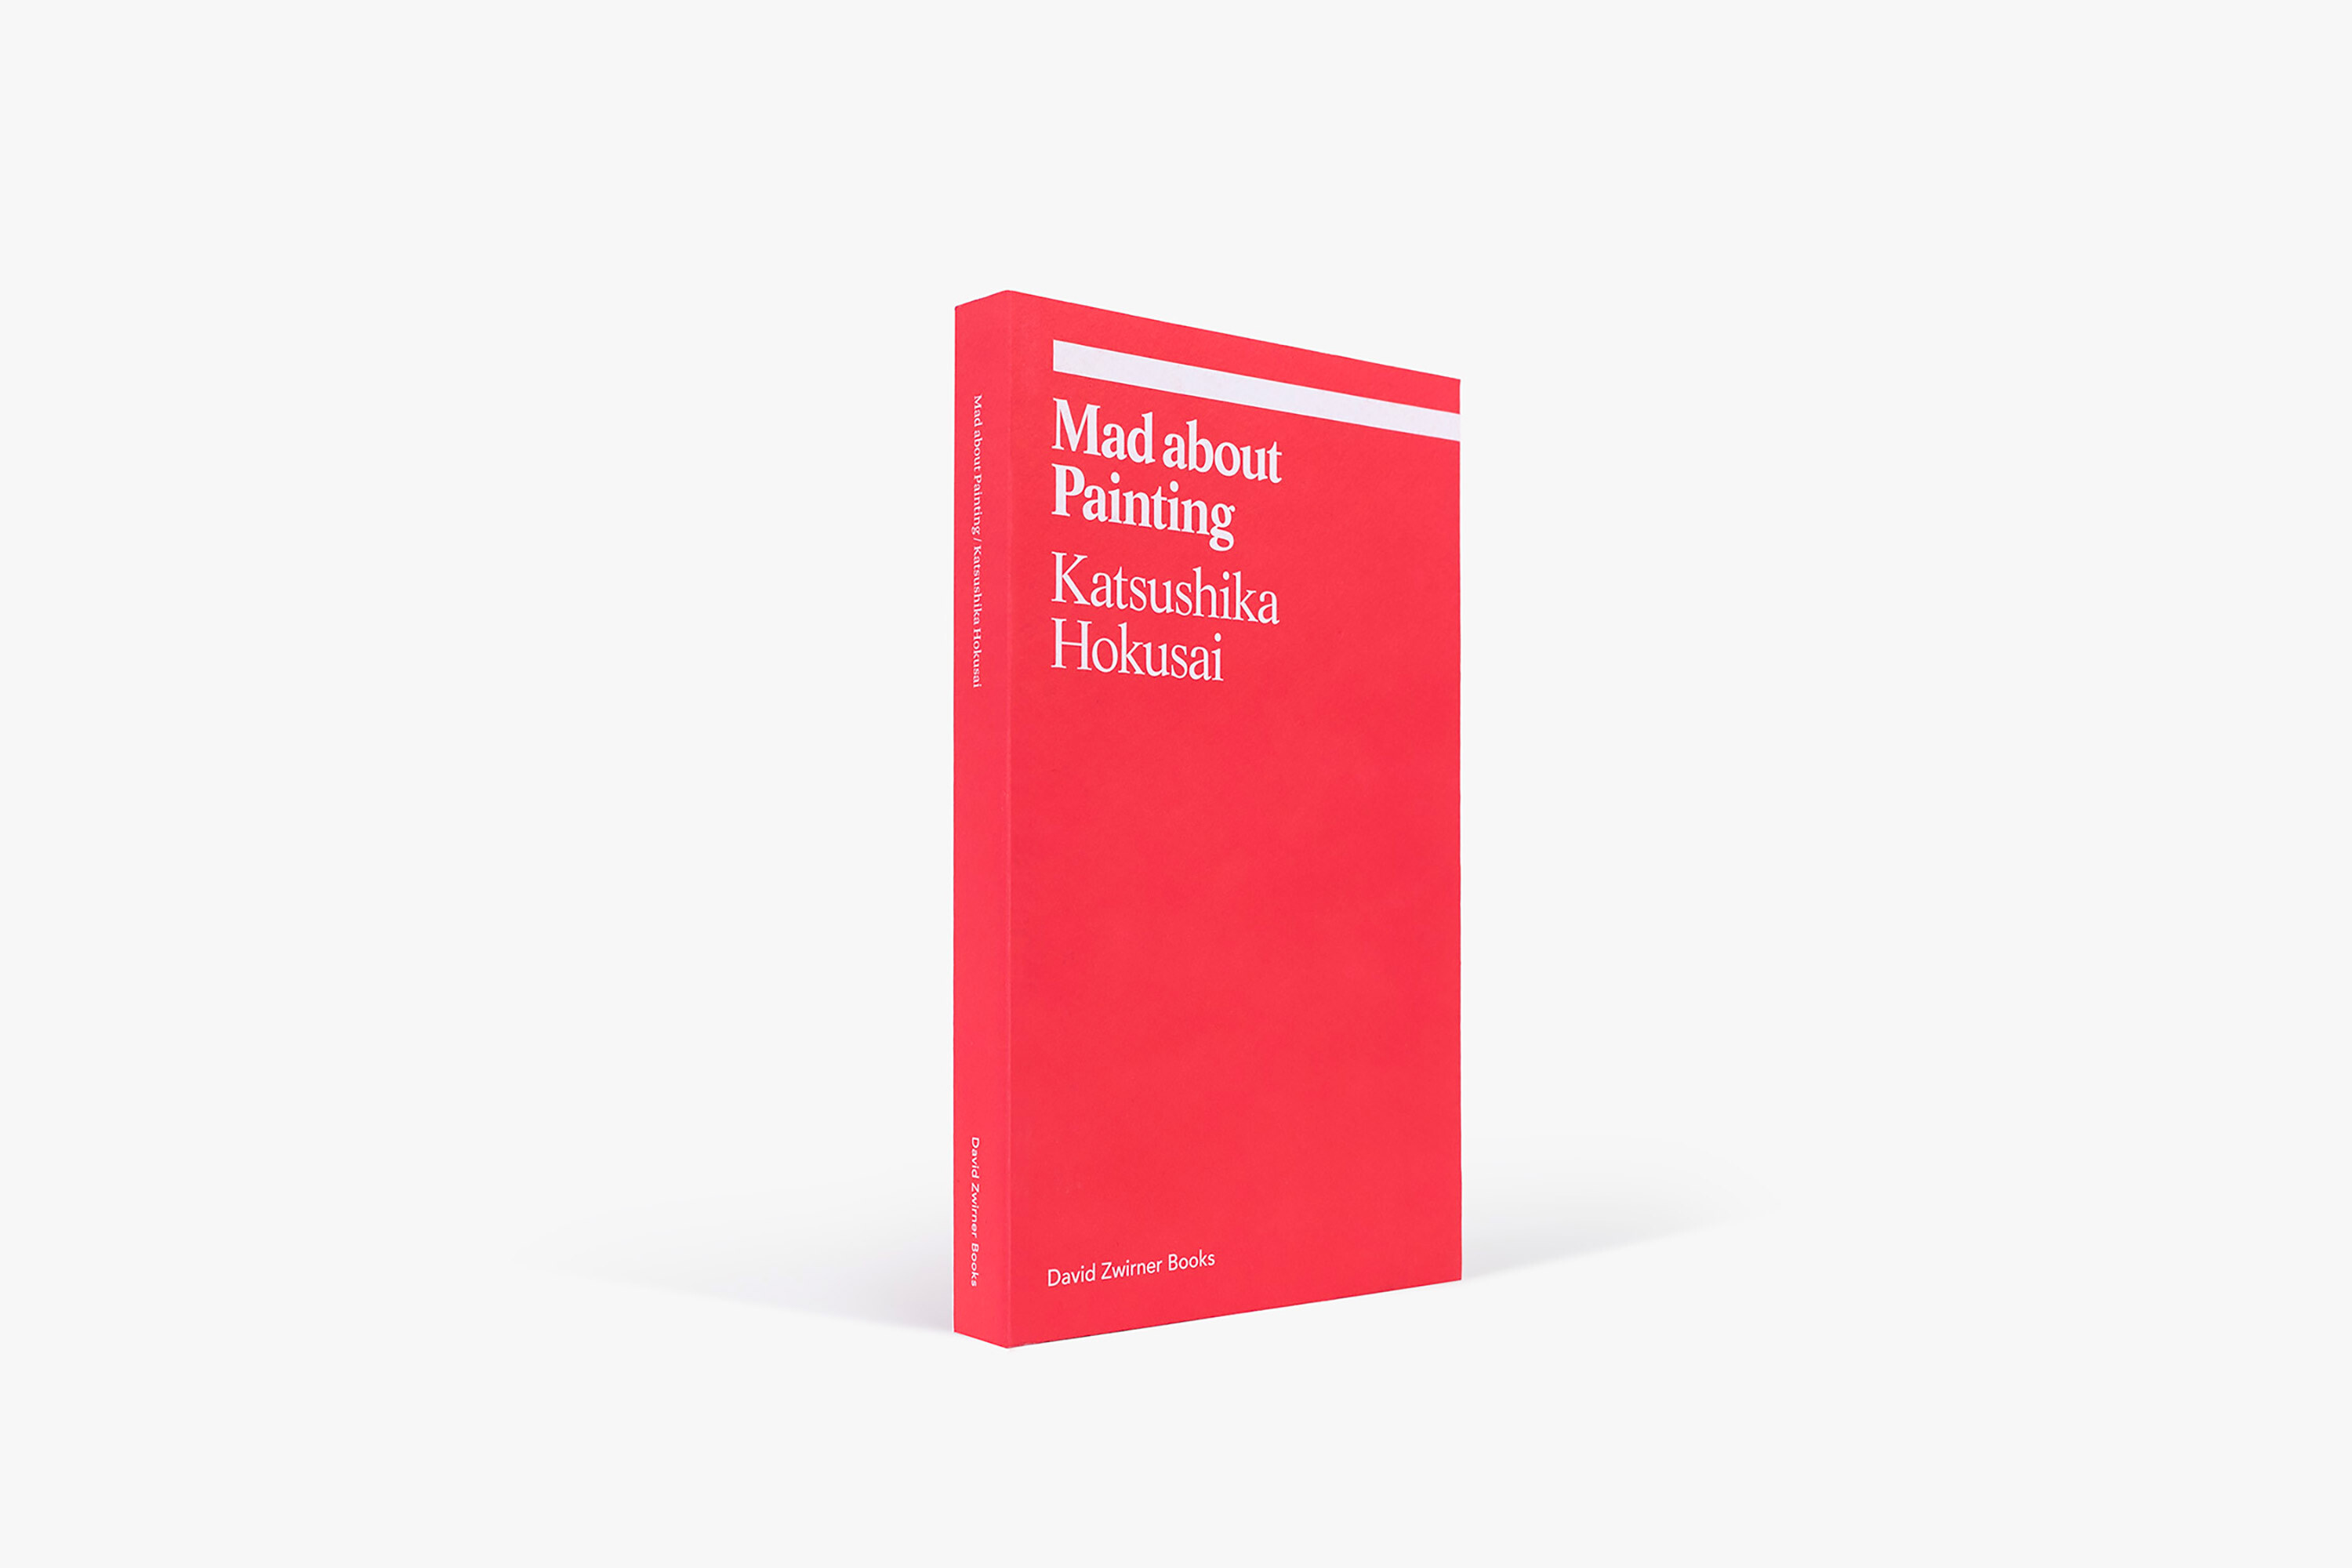 Mad about Painting [Book]